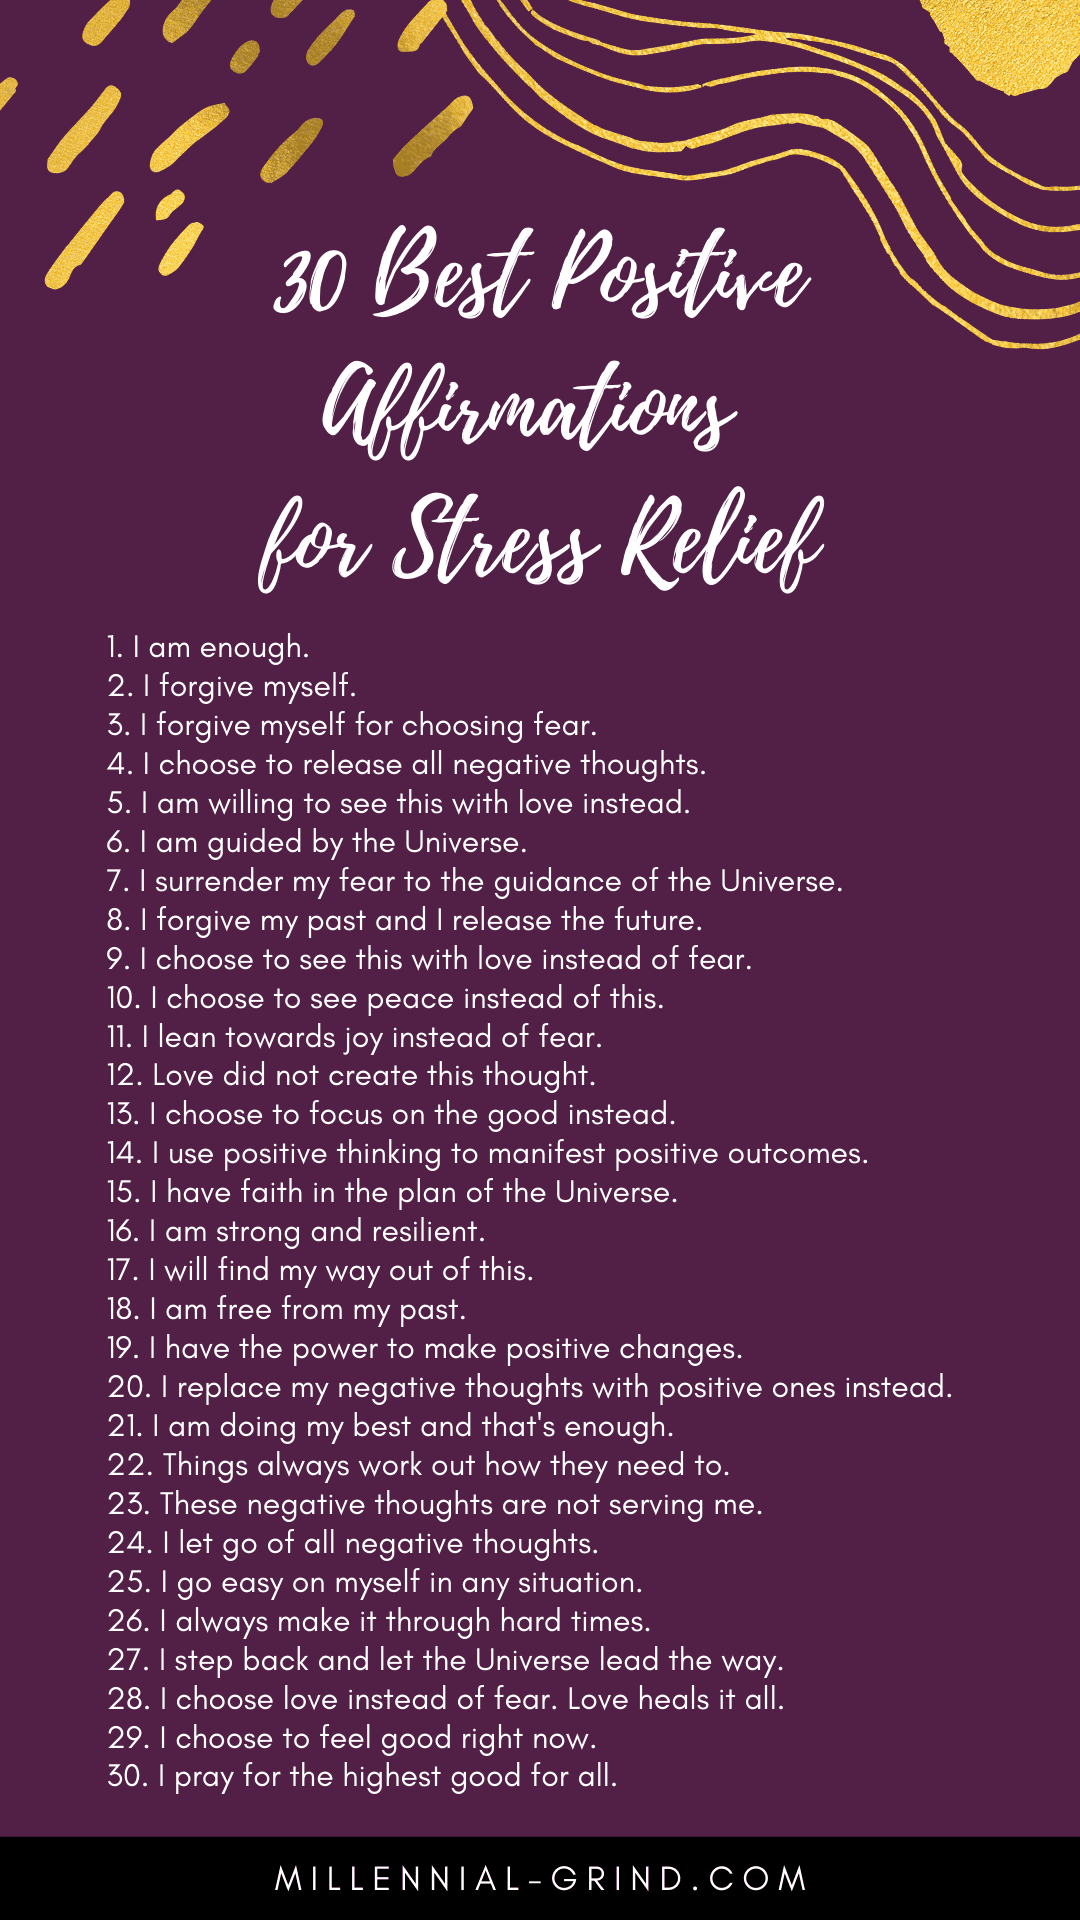 30 Best Positive Affirmations for Stress Relief